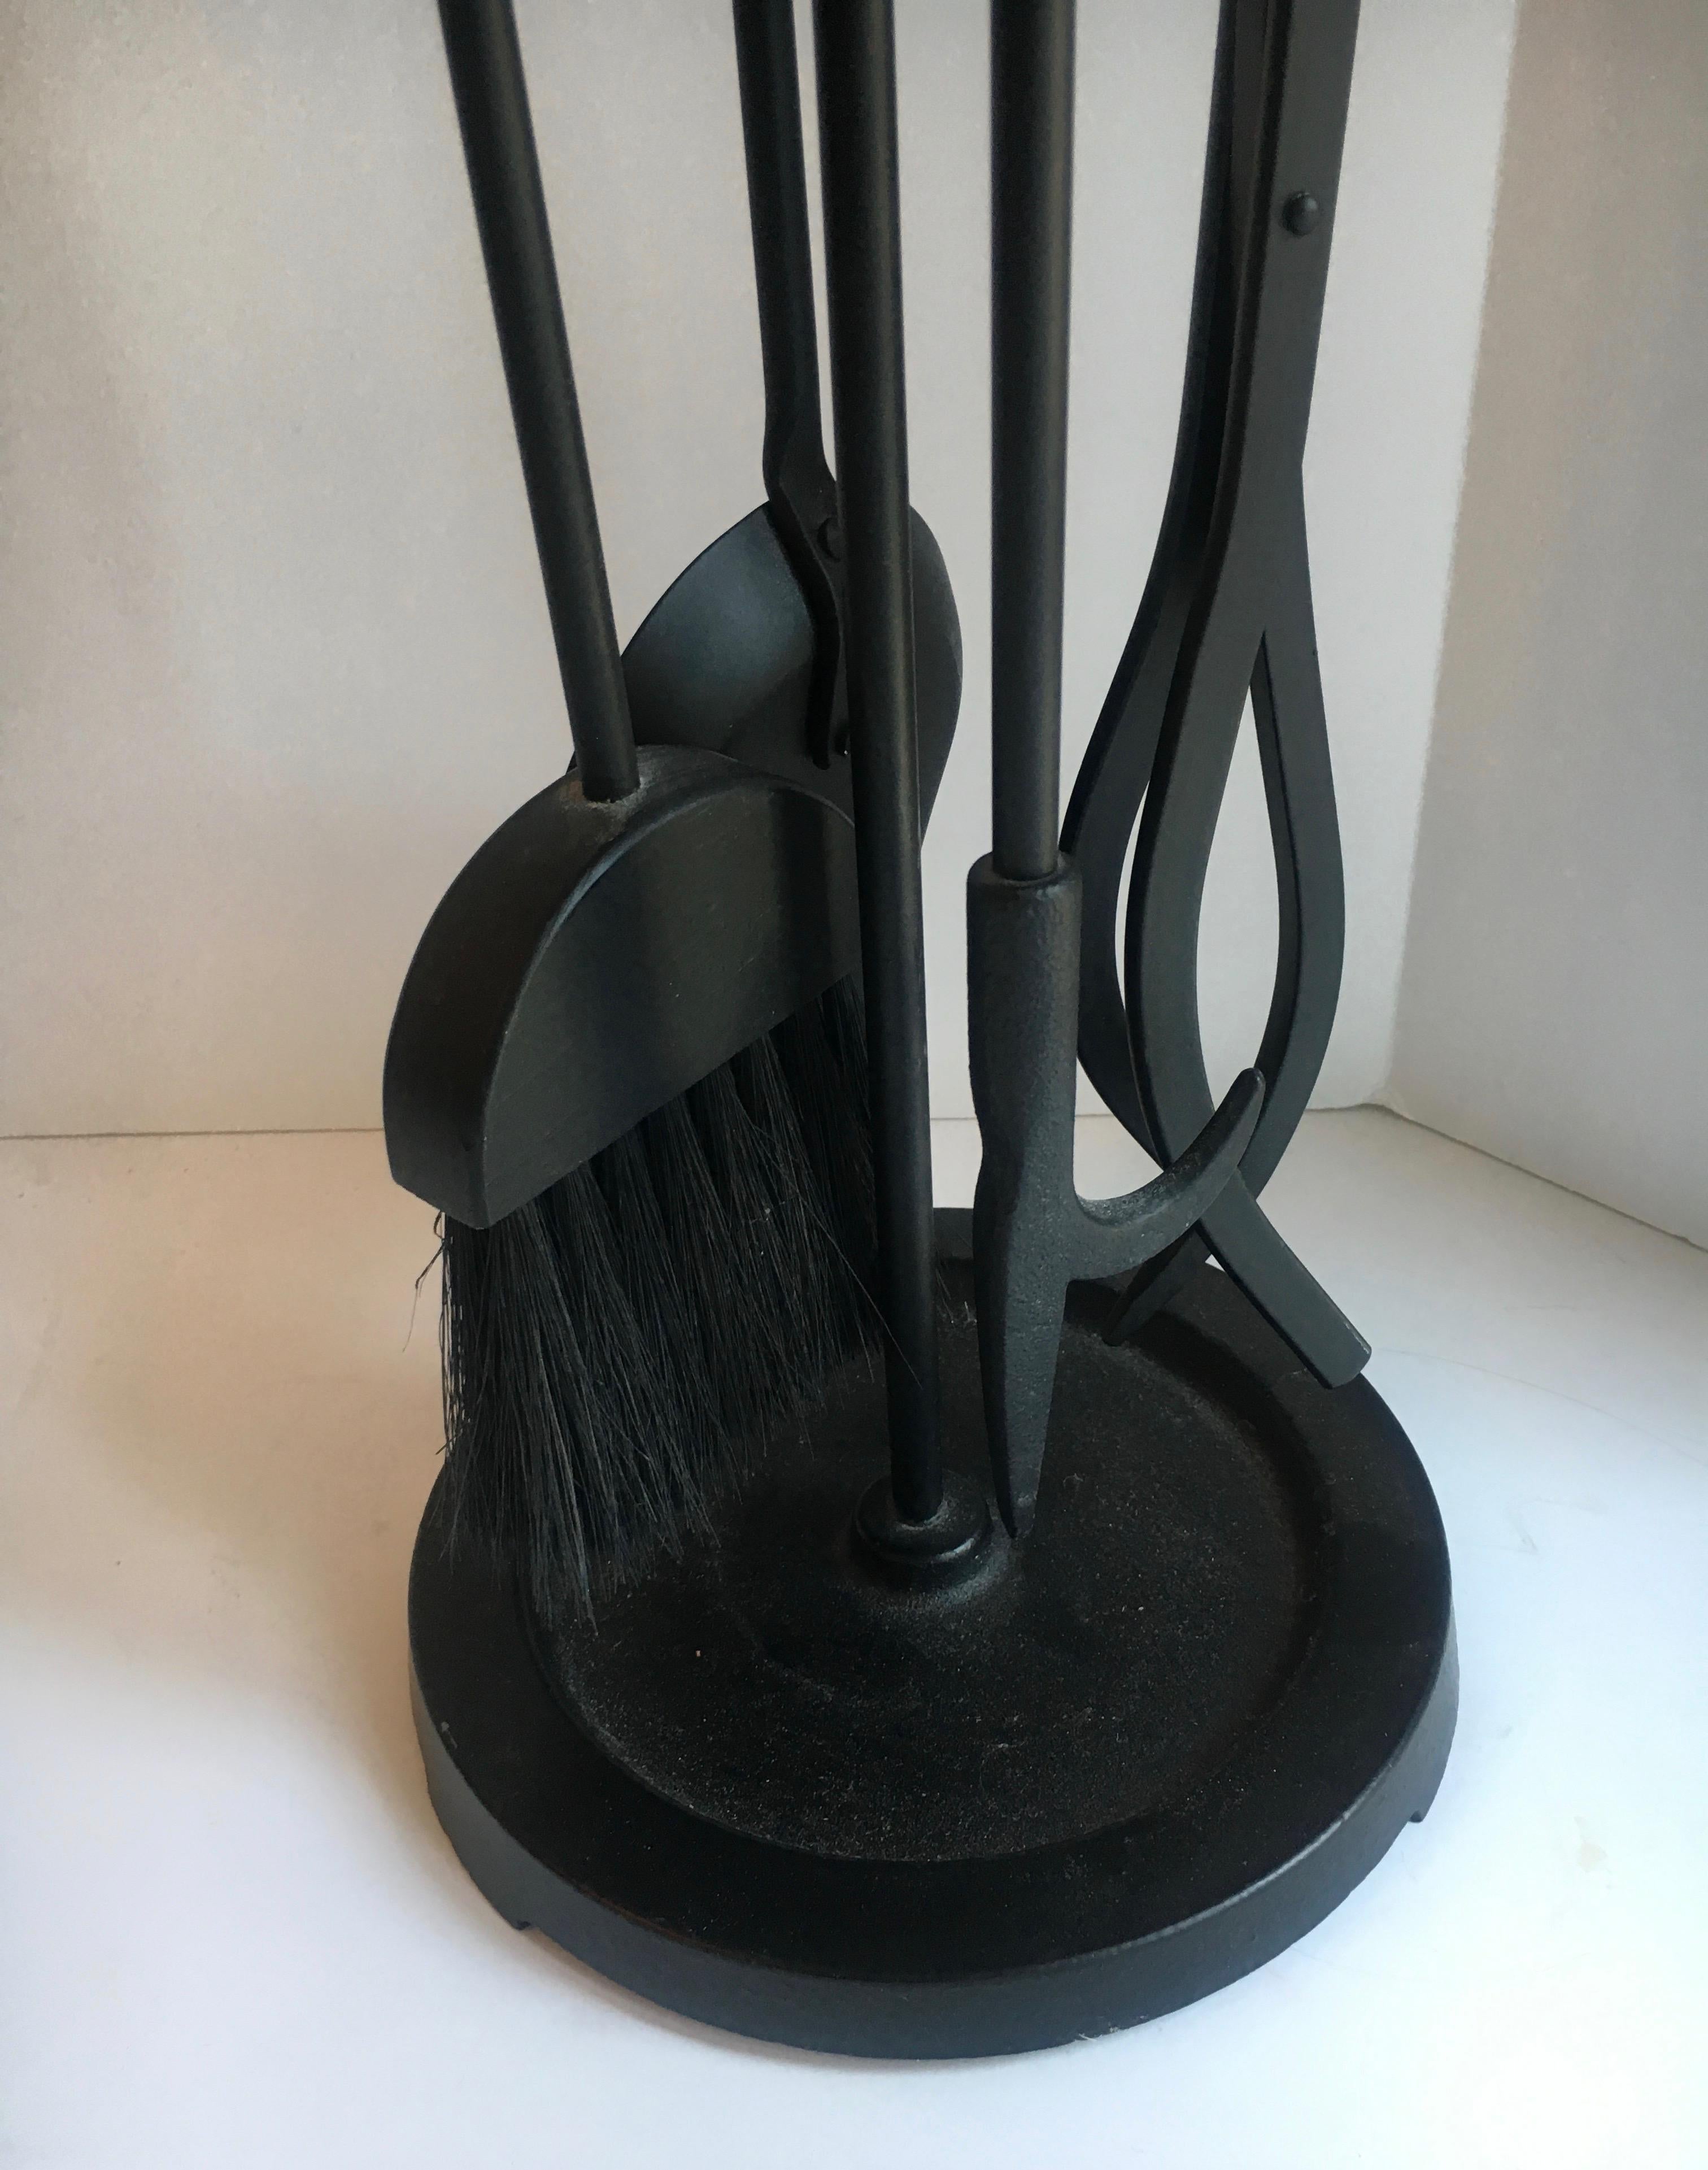 Five-piece black wrought iron fireplace tools with brass handles and stand - perfect for the clean and modern interior - all five pieces are very functional: Poker, brush, tongs, shovel.